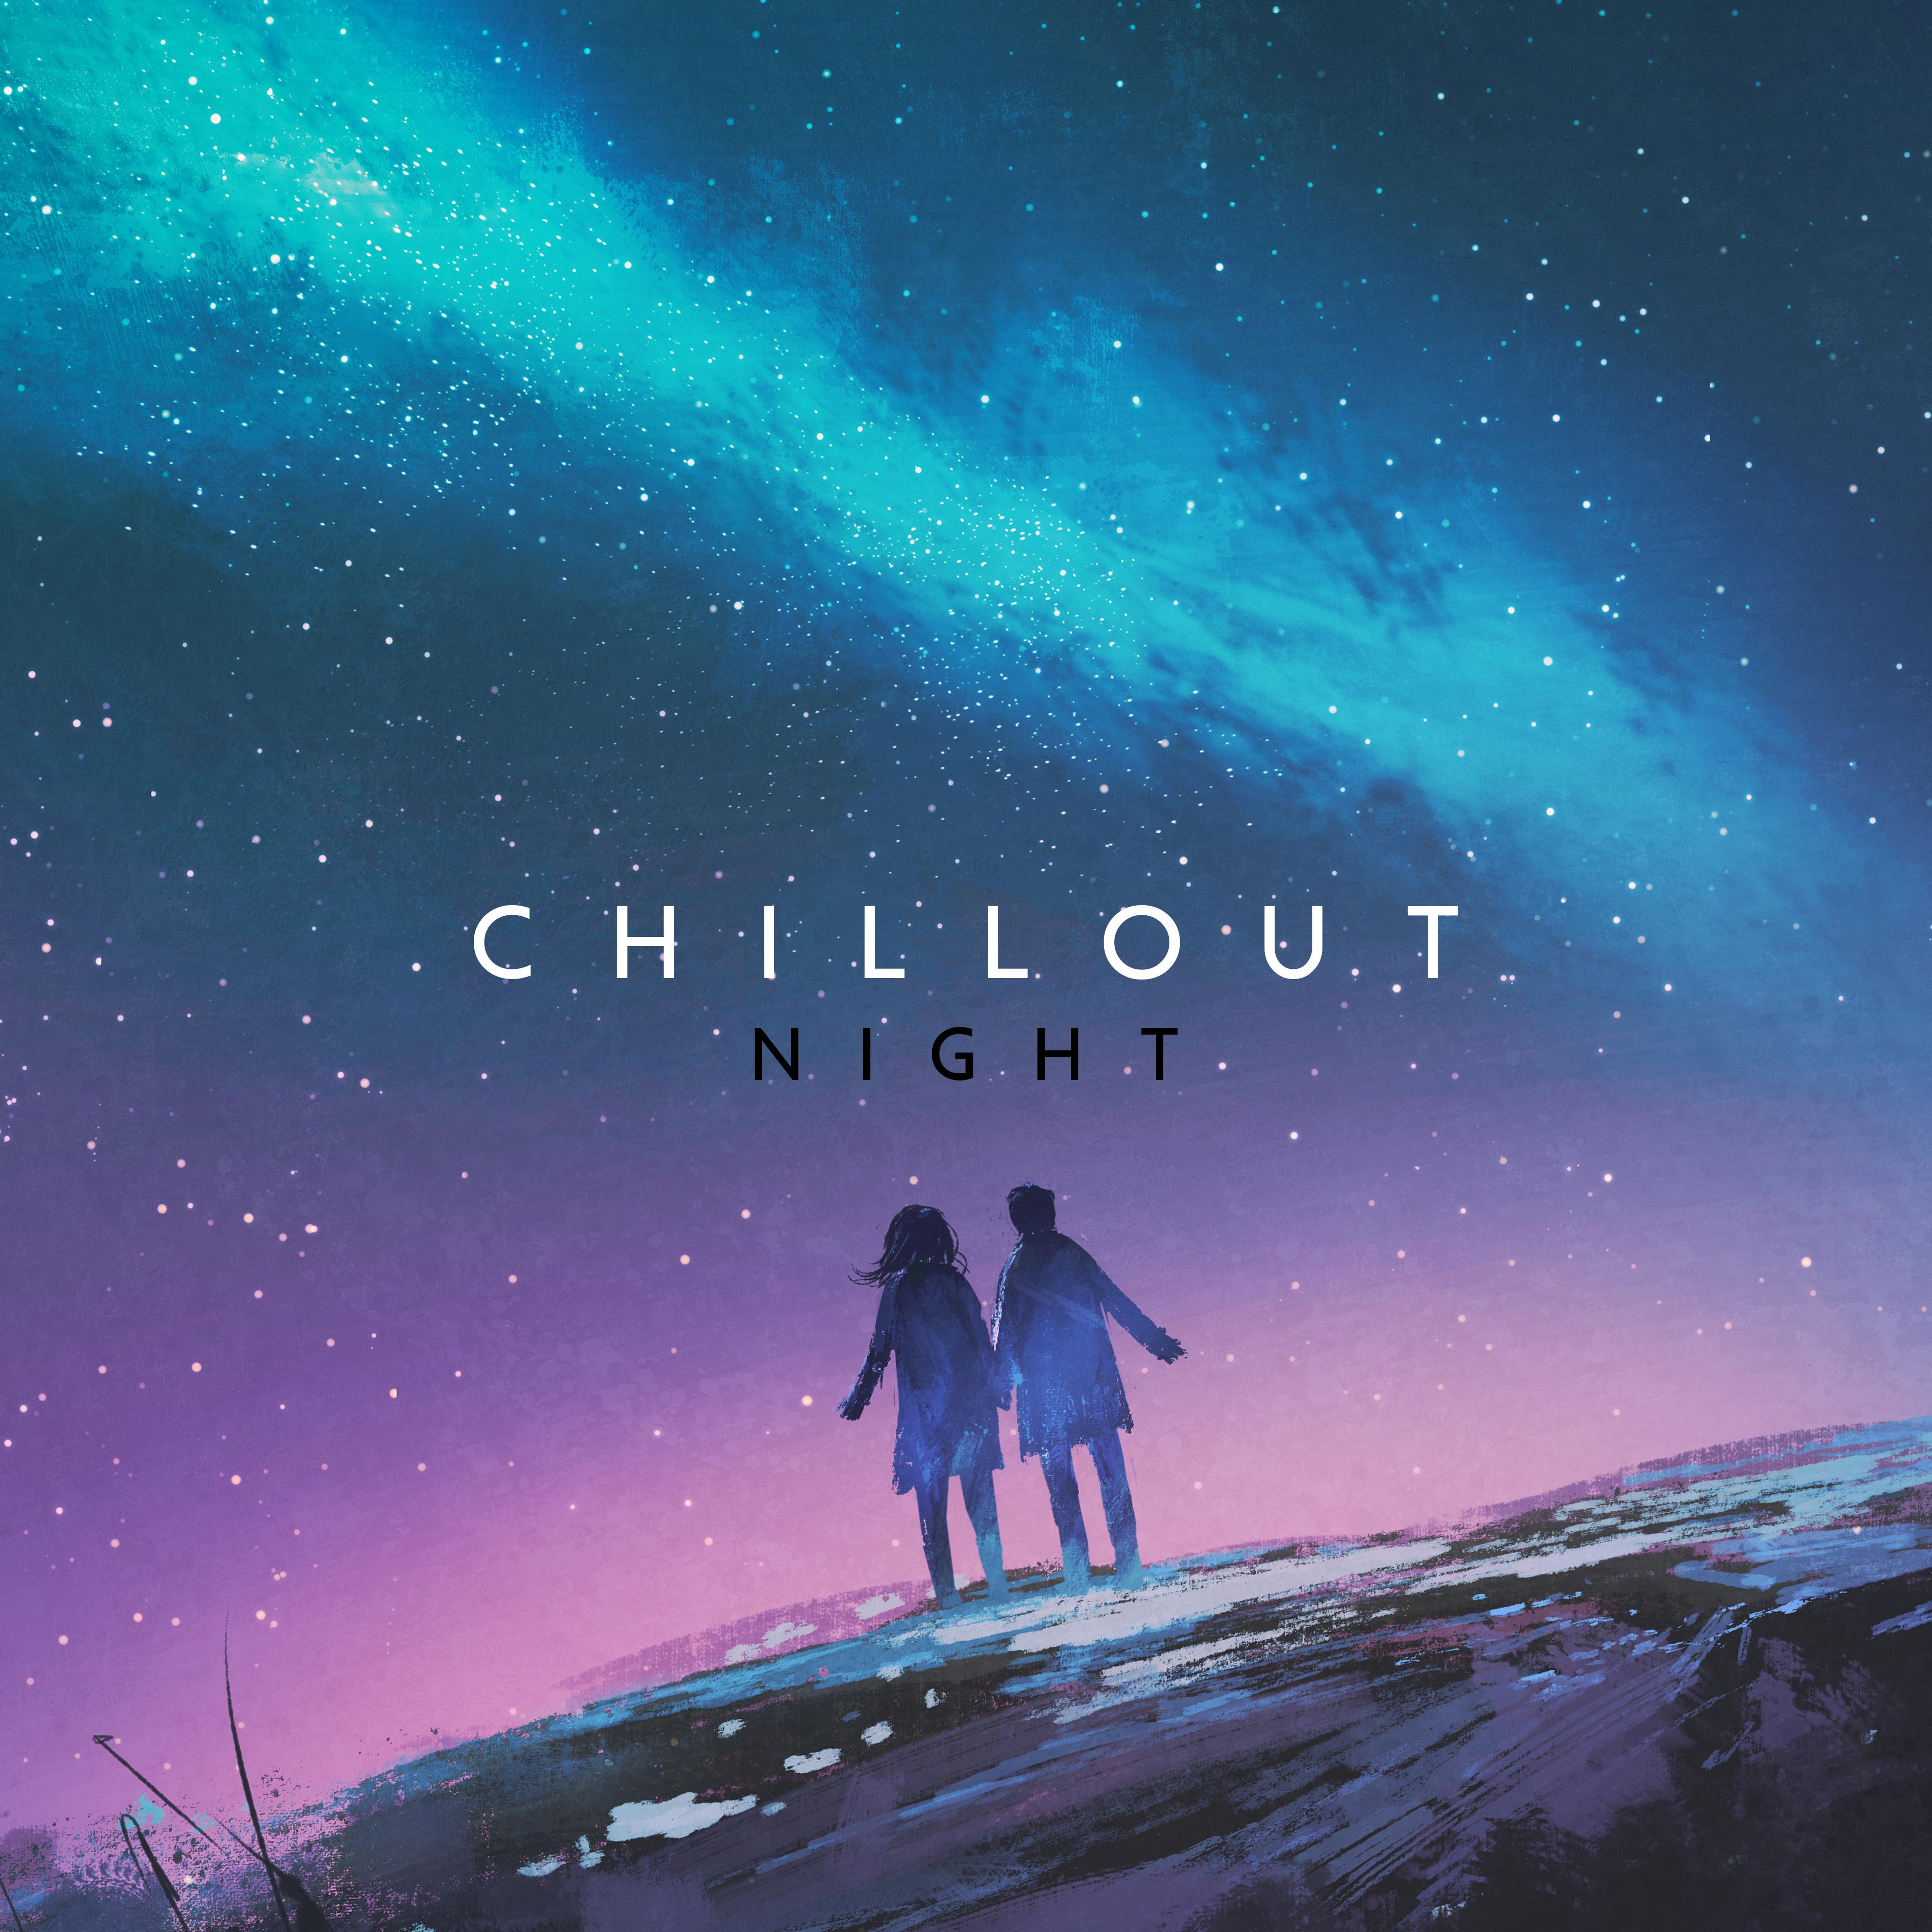 Chillout Night  Music for Reduce Stress, Soft Relaxing Beats, Relax Zone, Chillout Lounge, Calming Chillout